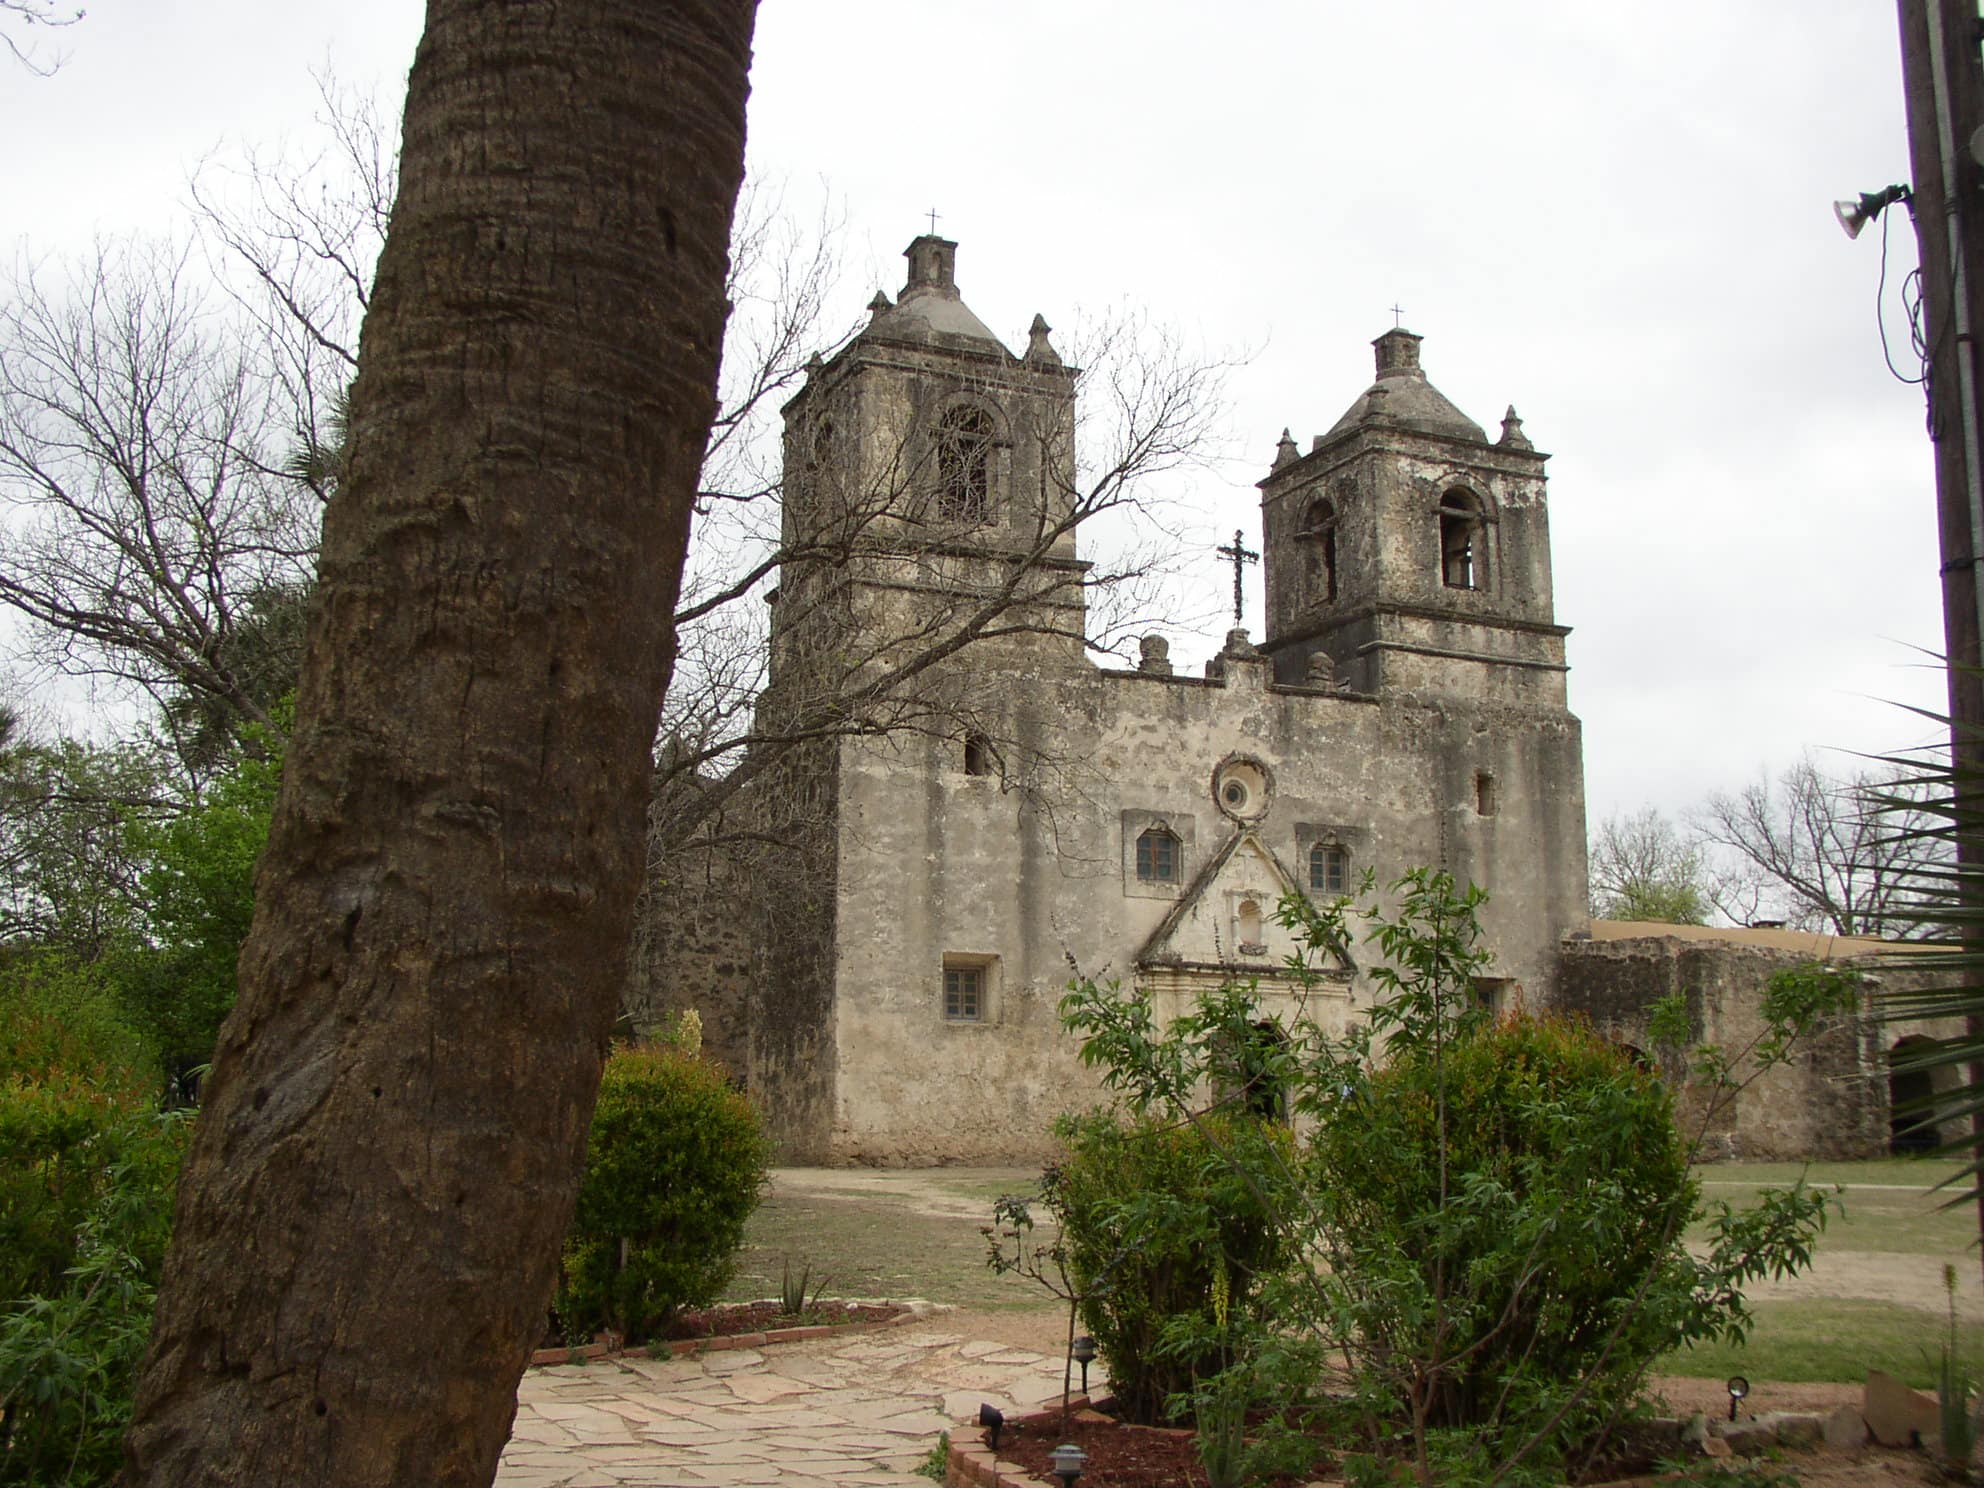 One of the Missions outside San Antonio - Texas